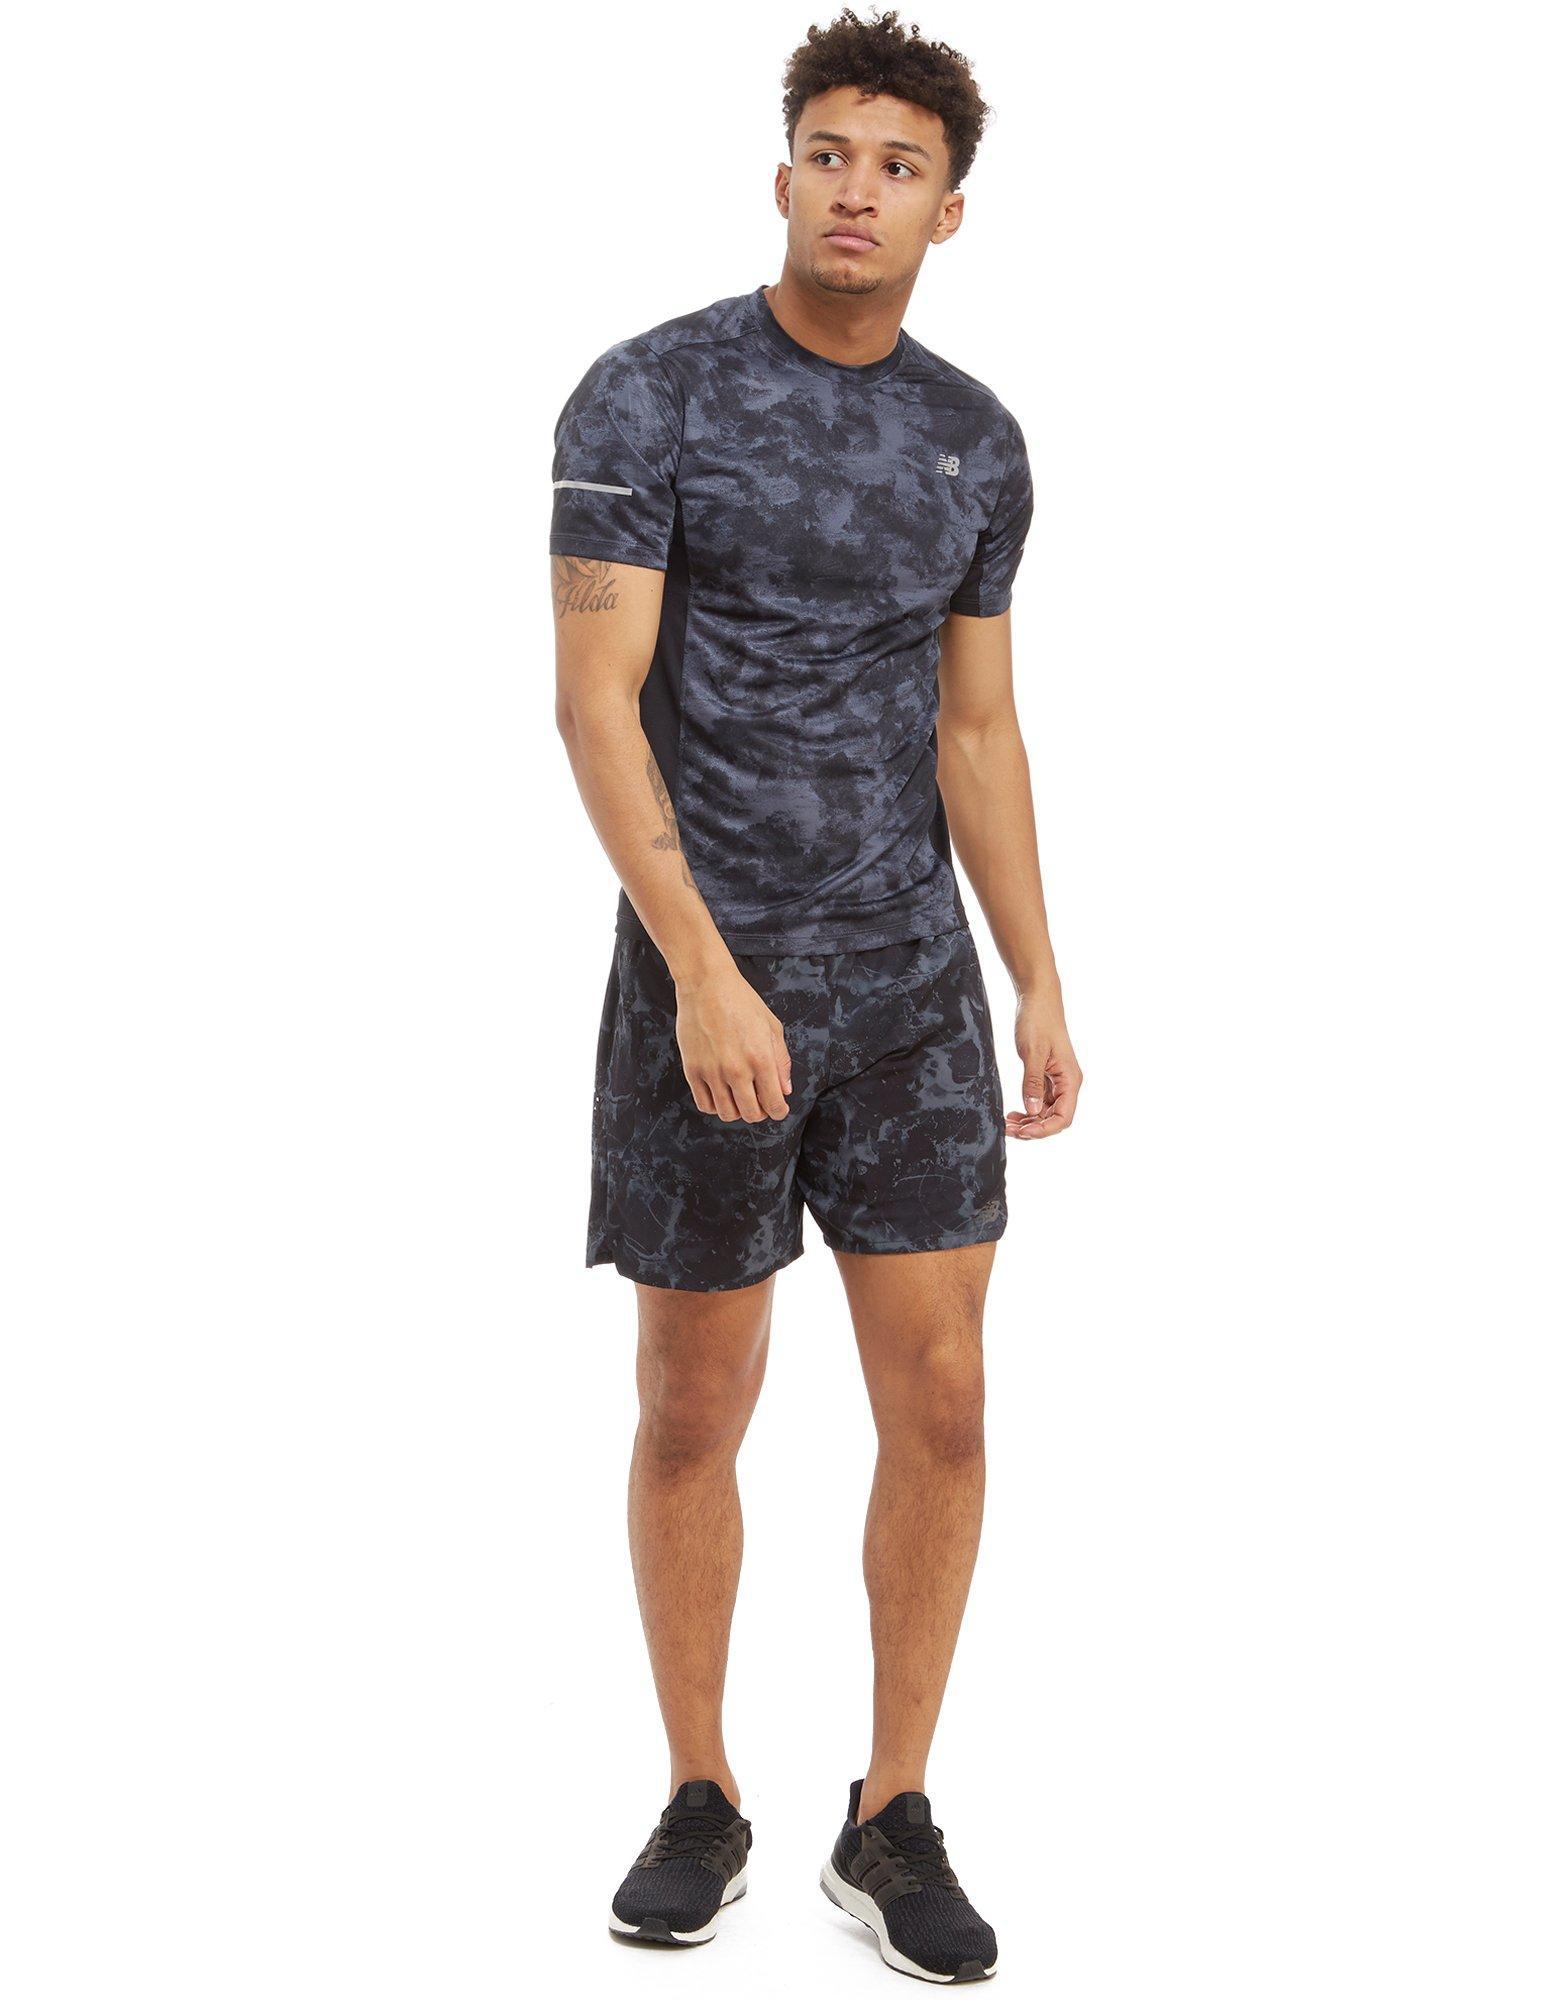 New Balance Synthetic Camo T-shirt in Black for Men - Lyst